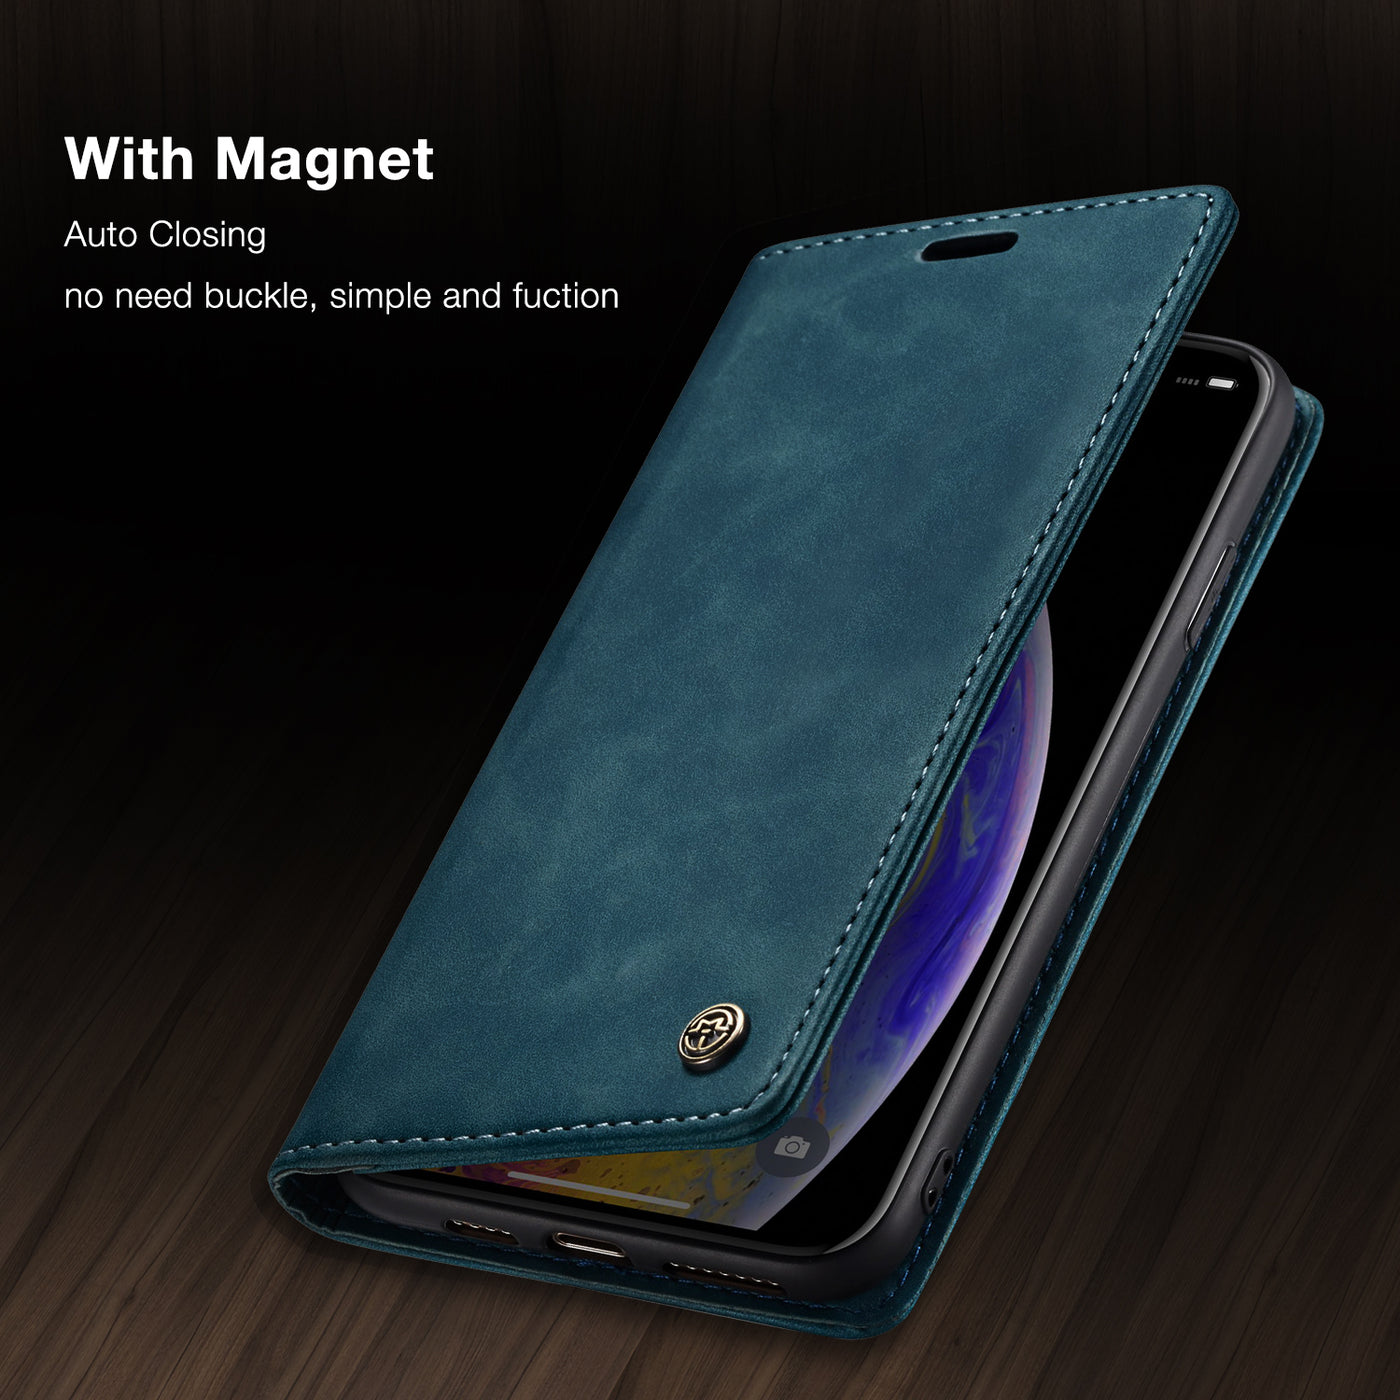 Apple iPhone Xs Magnetic flip Wallet case cover